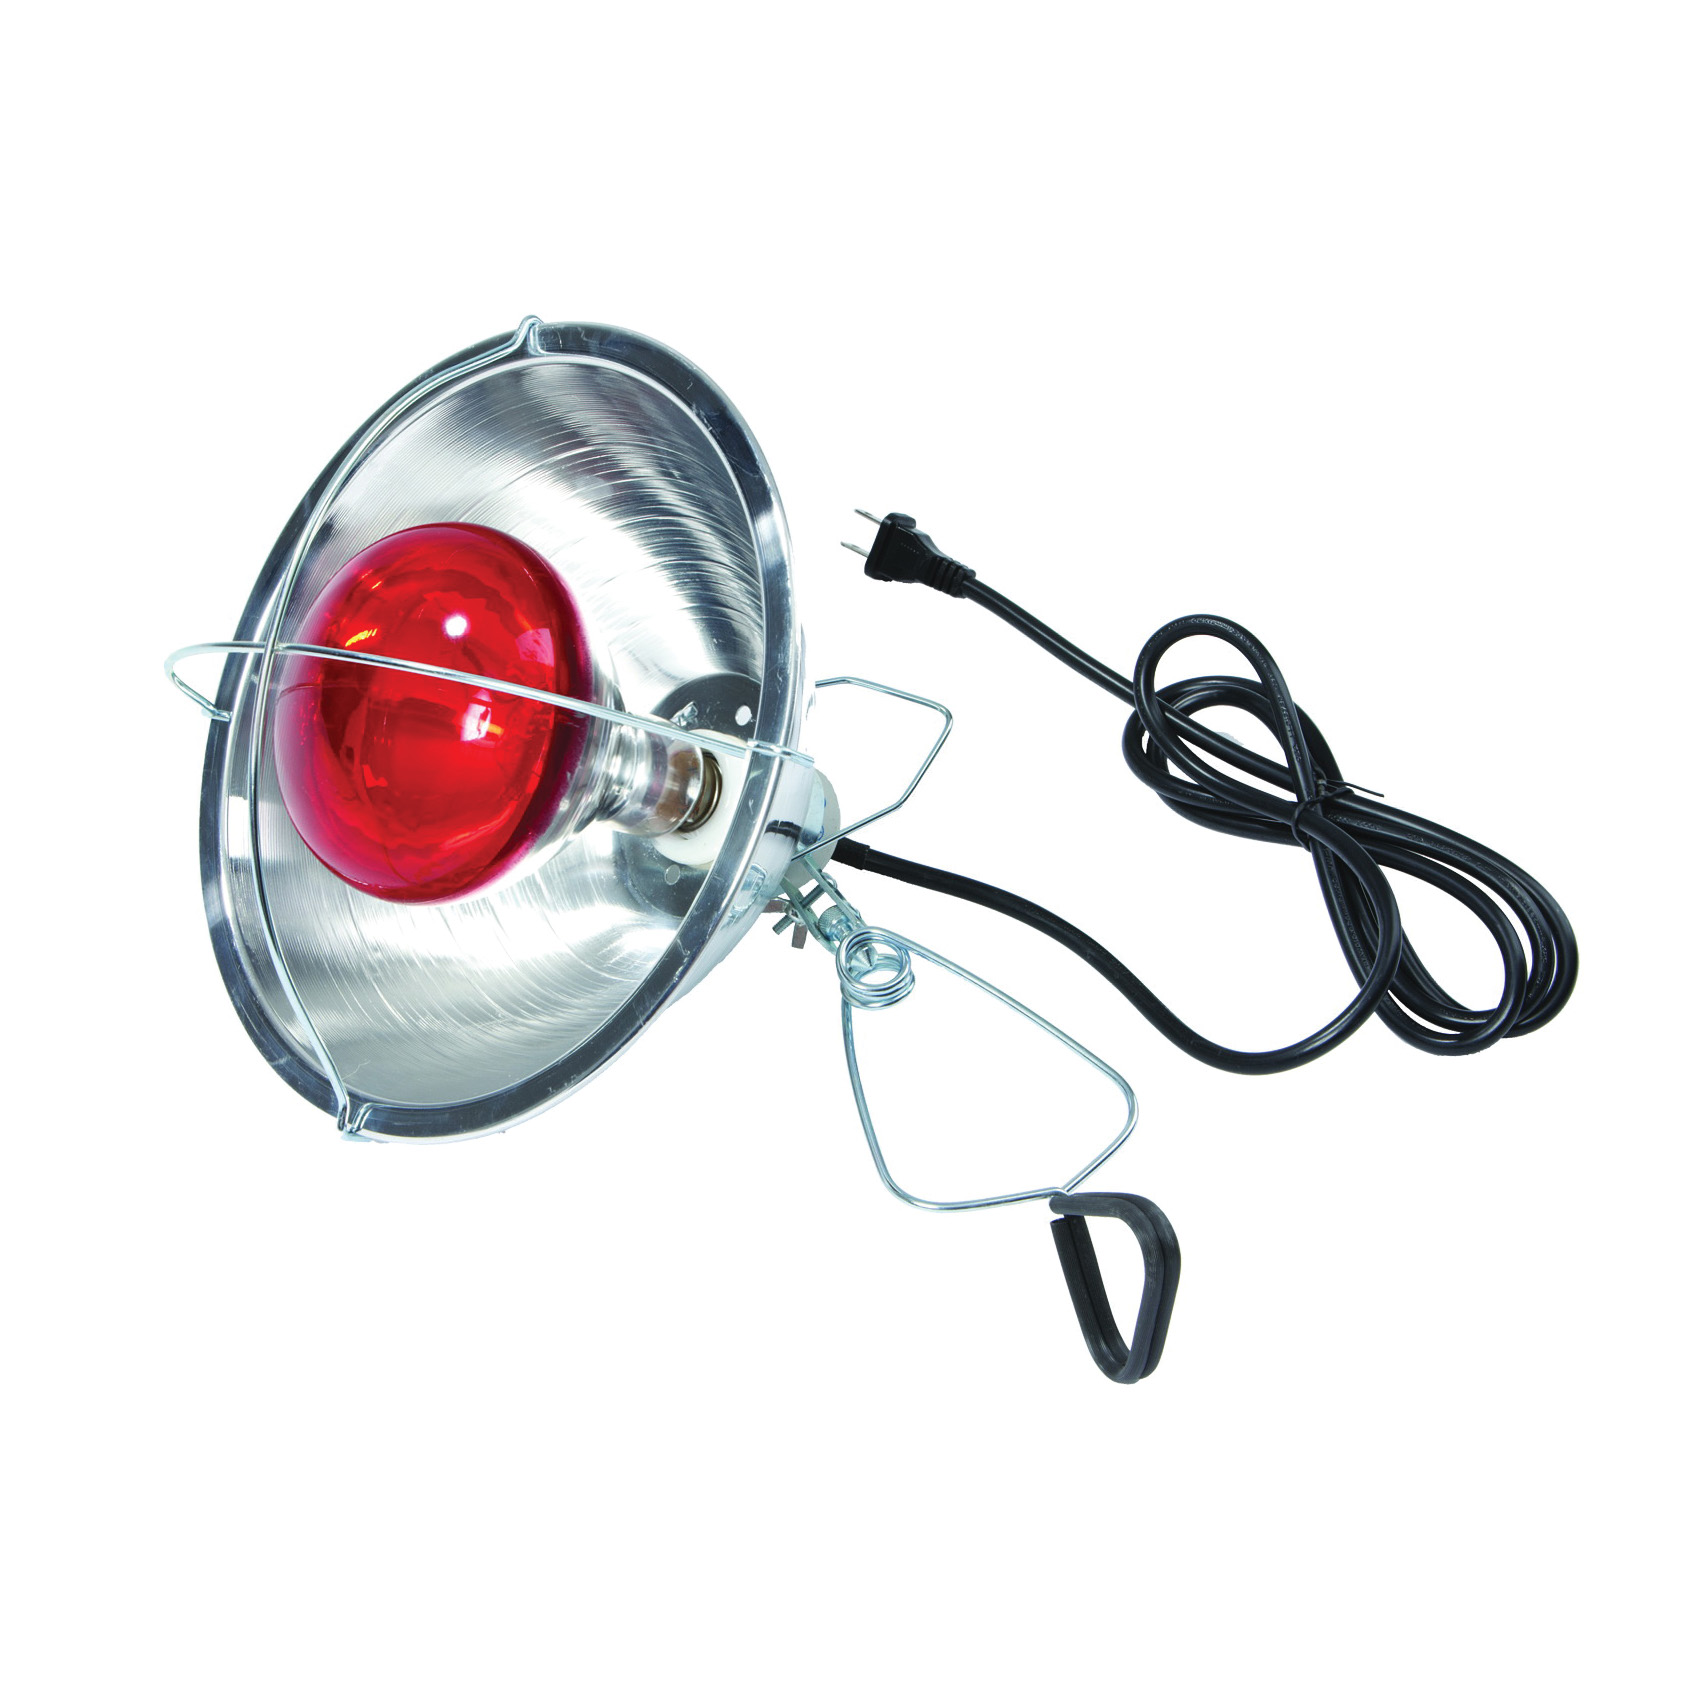 Little Giant 170017 Brooder Reflector Lamp, 300 W - 4